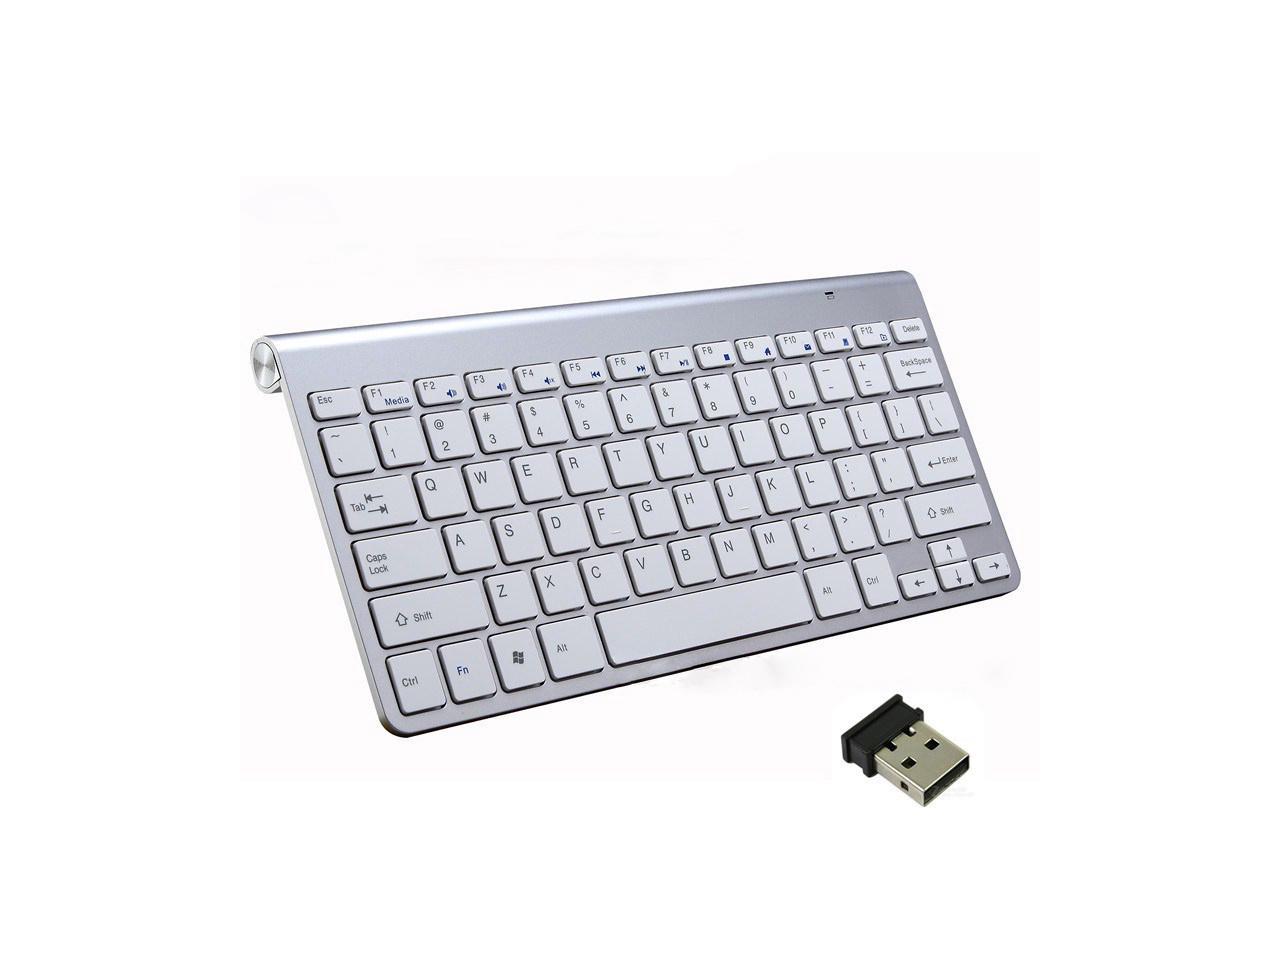 HF-KWM01: 2.4GHz Ultra-Thin Wireless 2.4G keyboard and Mouse Combo - Click Image to Close